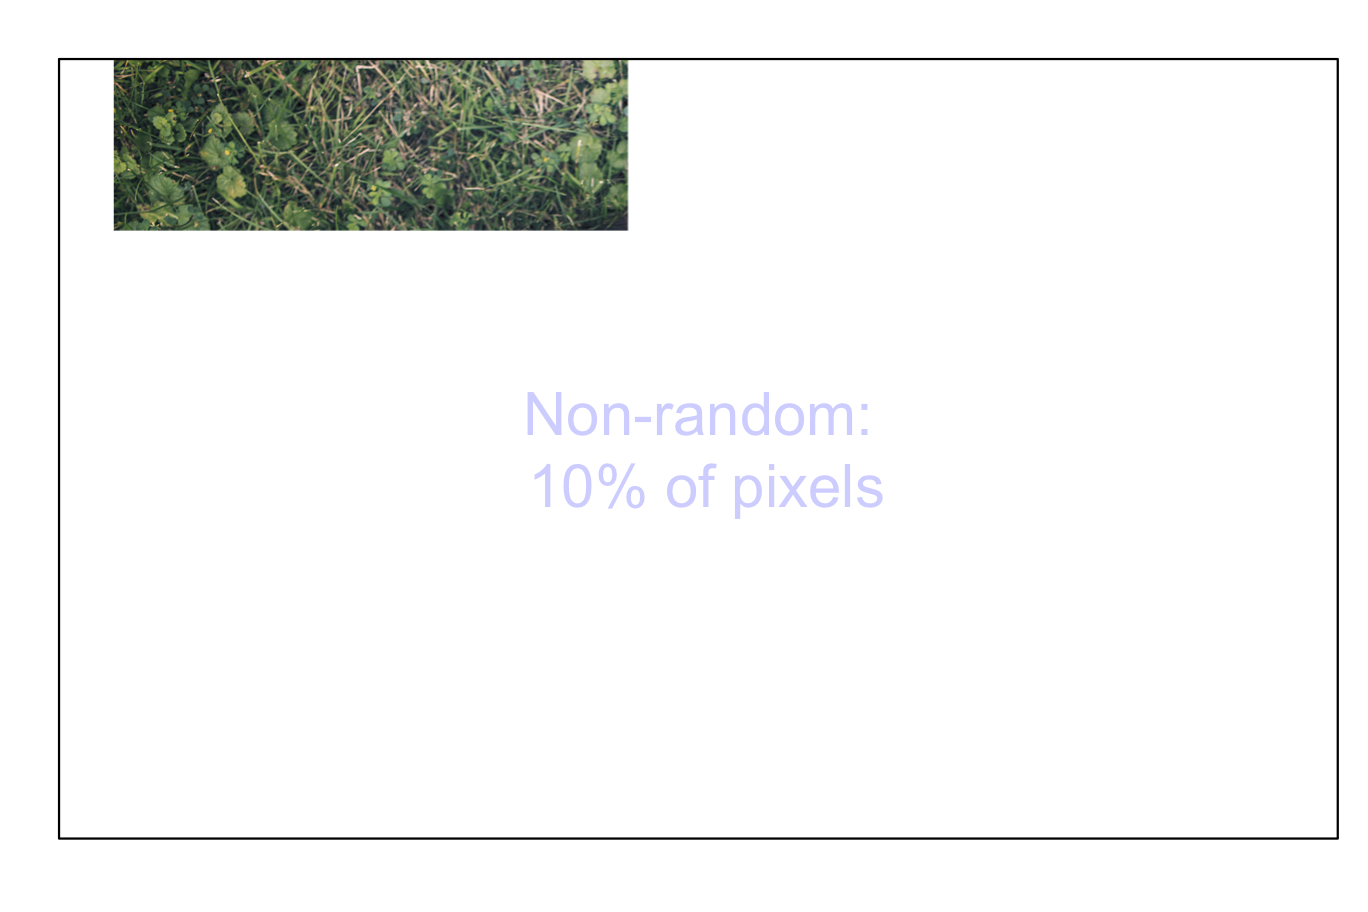 Non-random samples from an image: 5 percent of pixels (top left); 10 percent of pixels (top right); 25 percent of pixels (bottom left); 50 percent of pixels (bottom right)